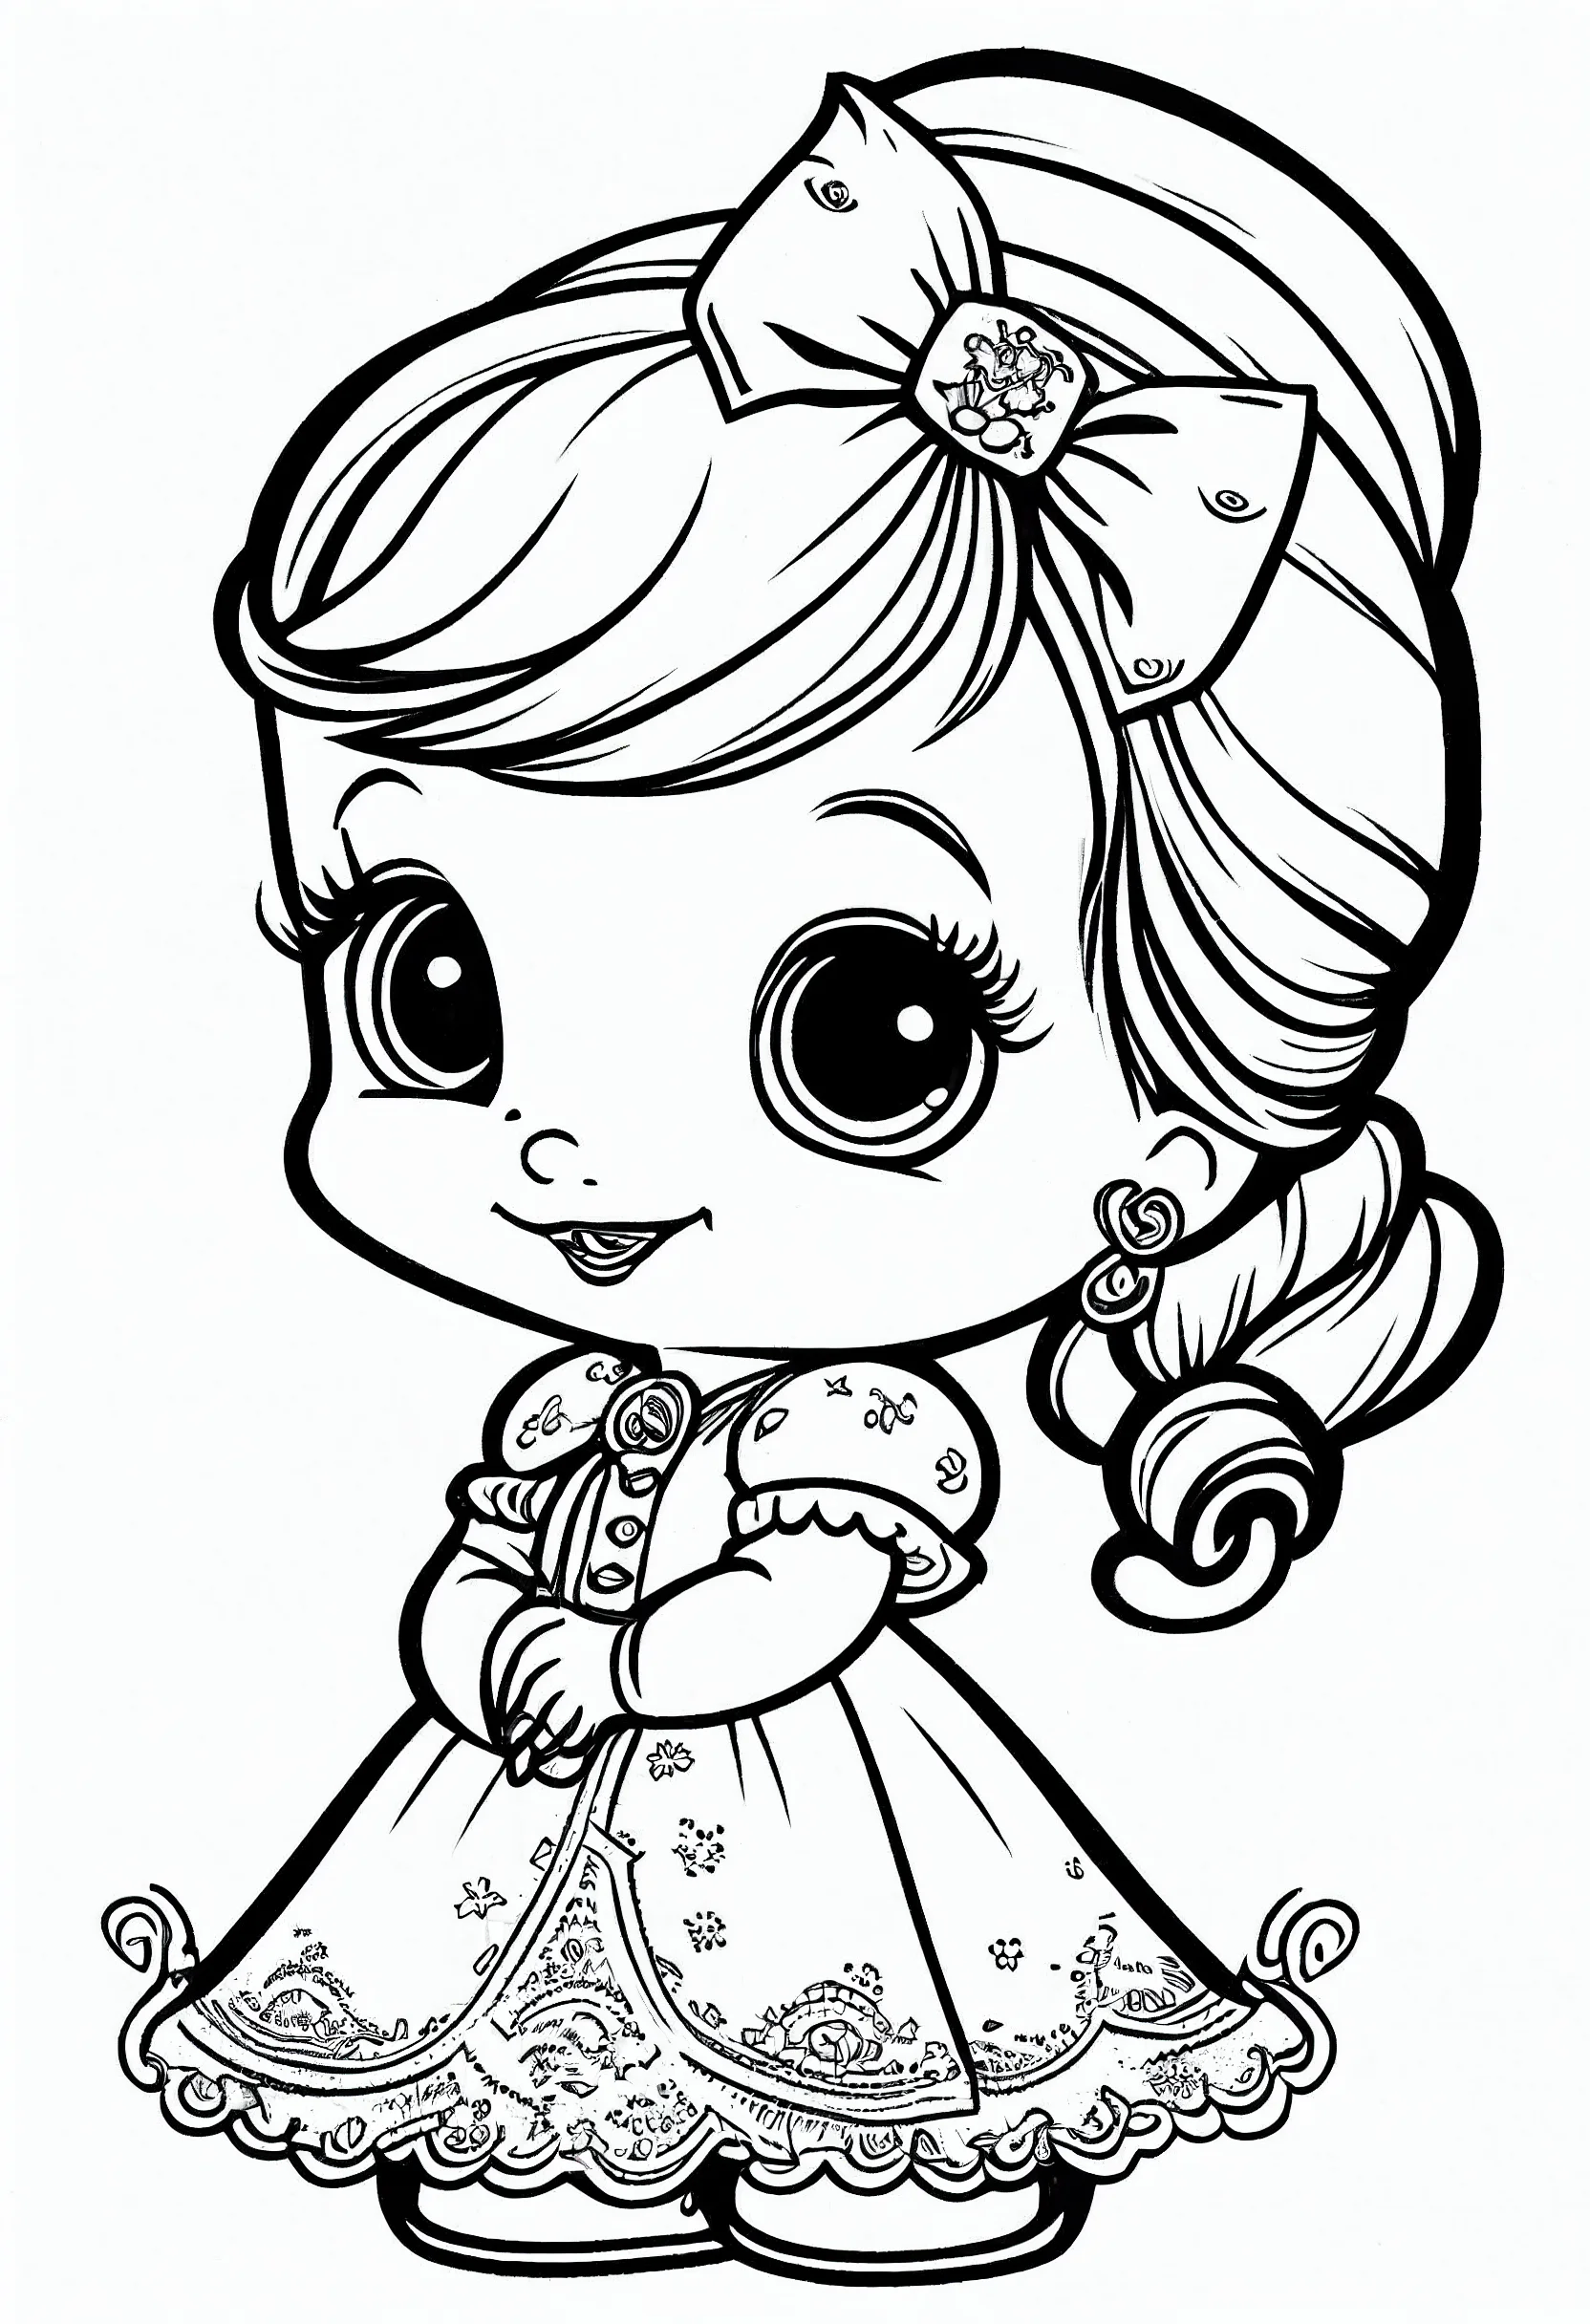 Disney cute coloring pages